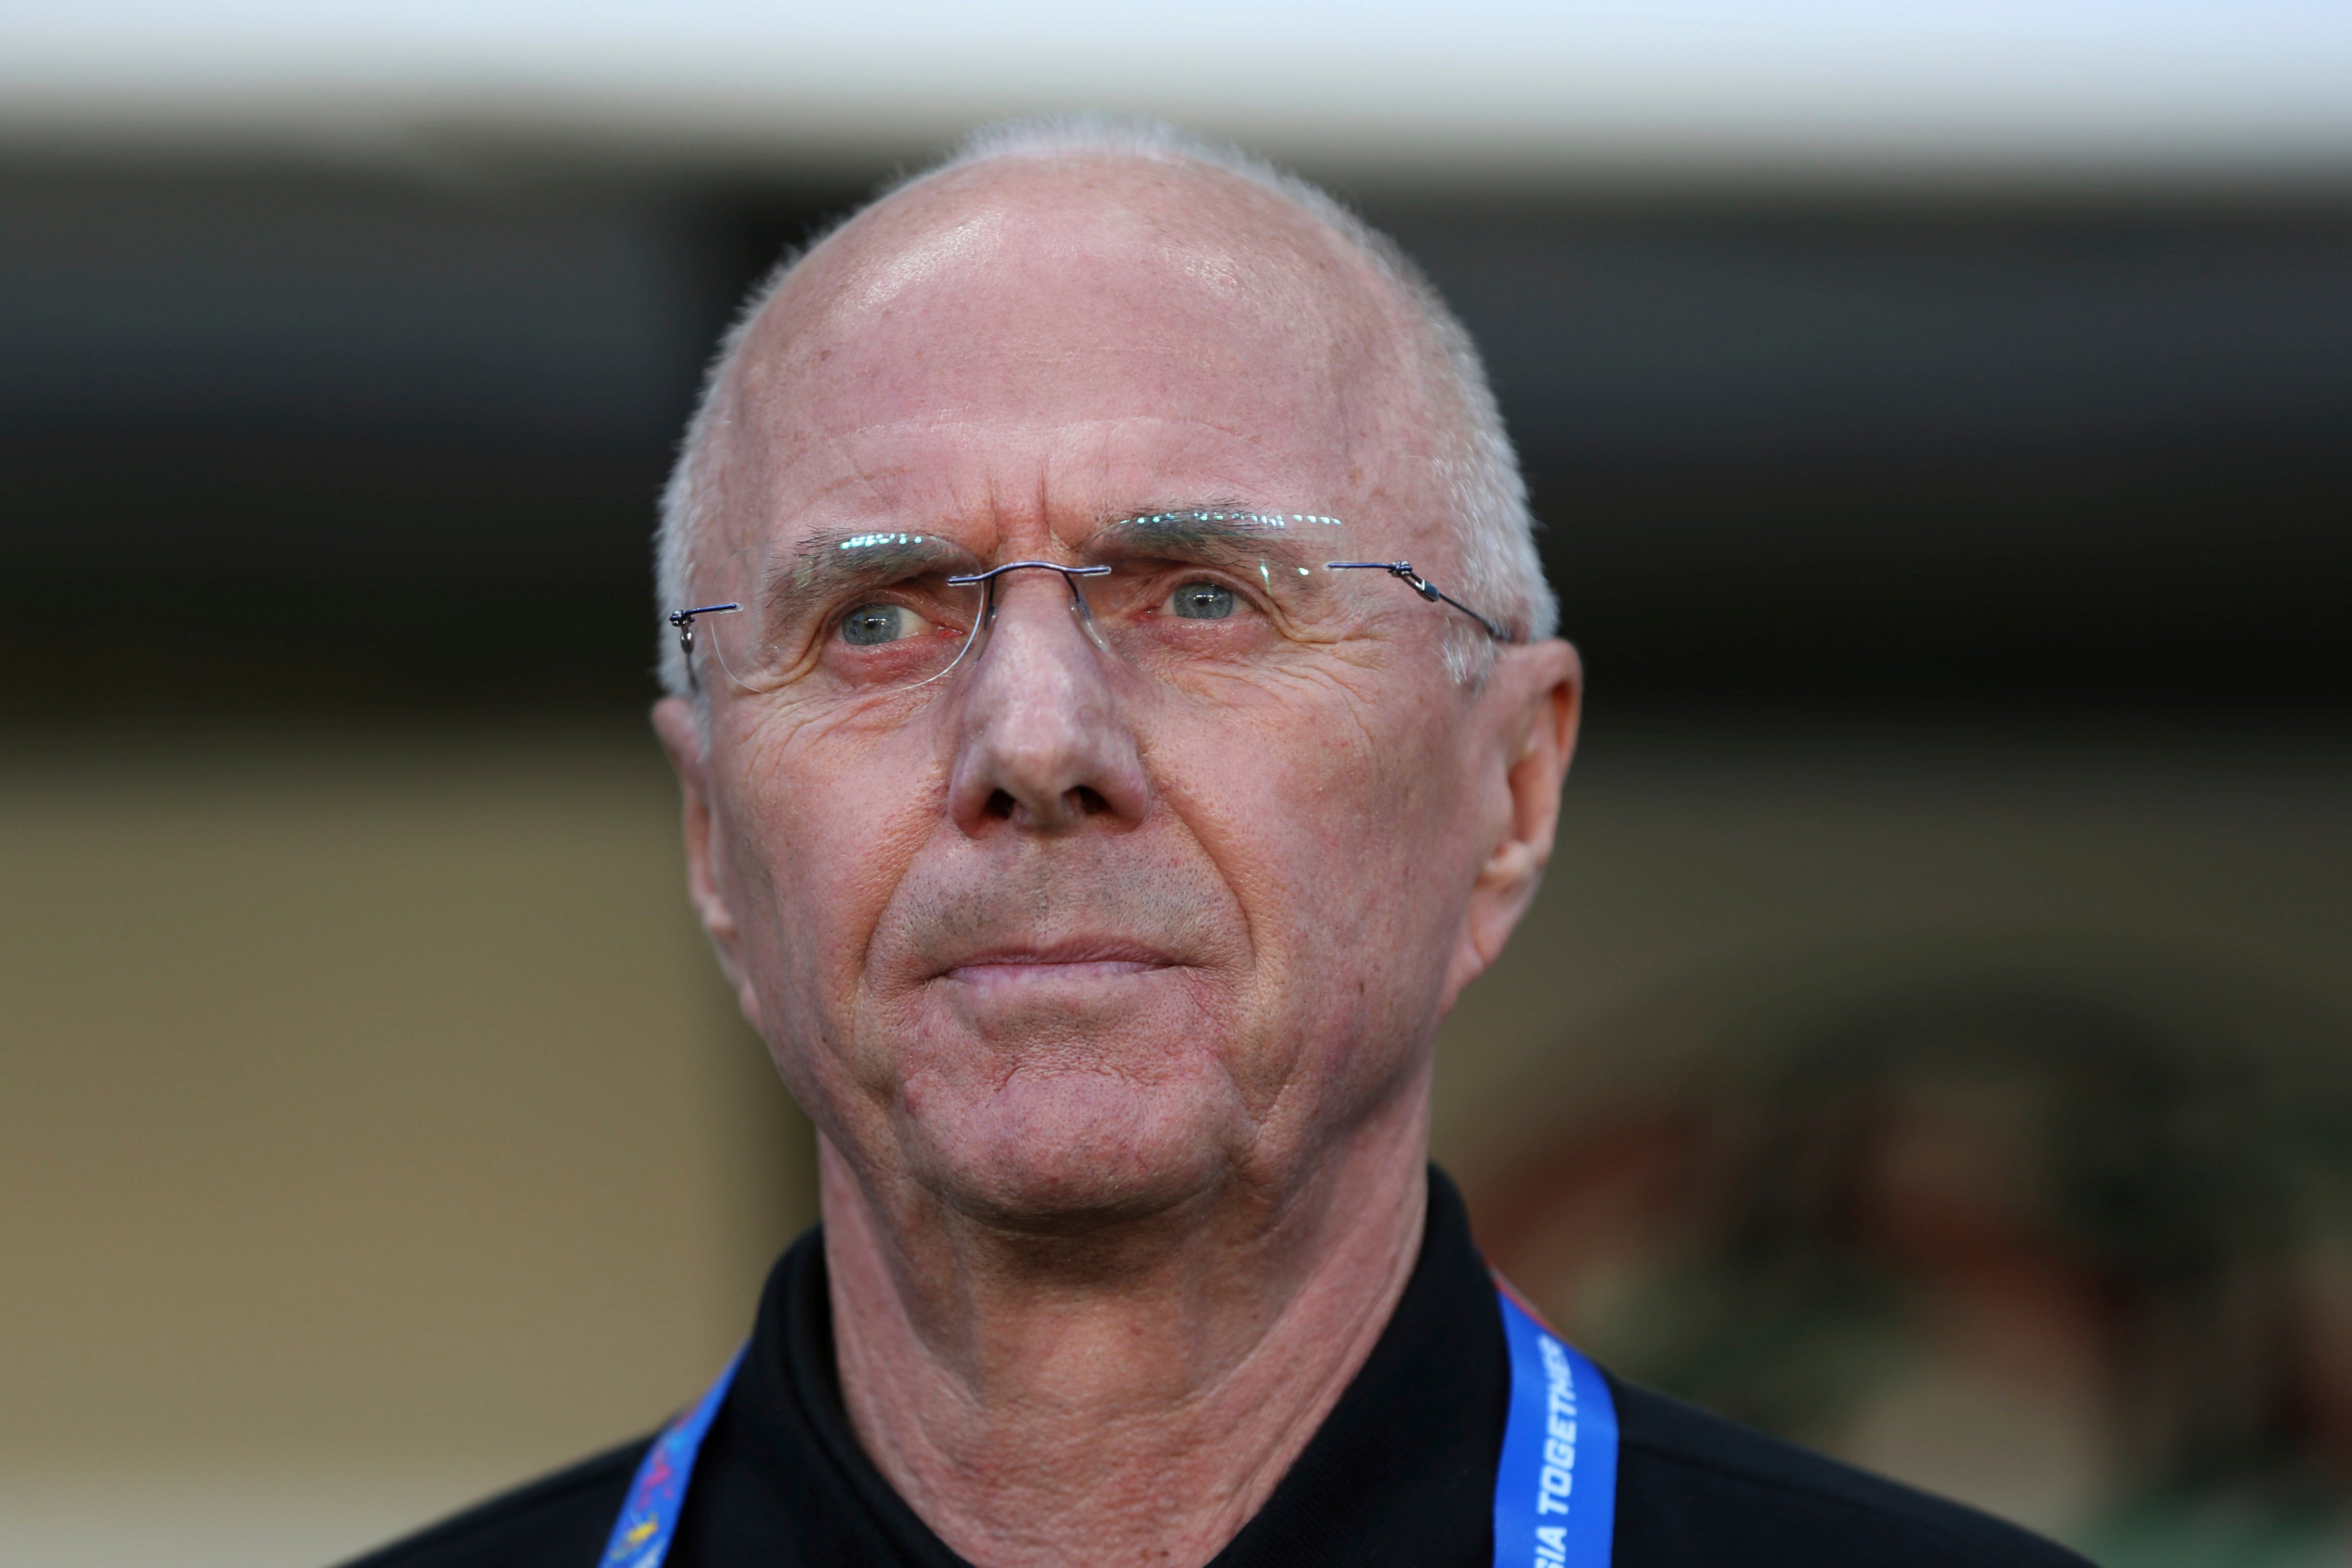 Then Philippines’ head coach Sven-Goran Eriksson, looks on during the AFC Asian Cup Group C game between China and Phillipines at Mohammed Bin Zayed Stadium in Abu Dhabi, on January 11, 2019.  Photo: AP